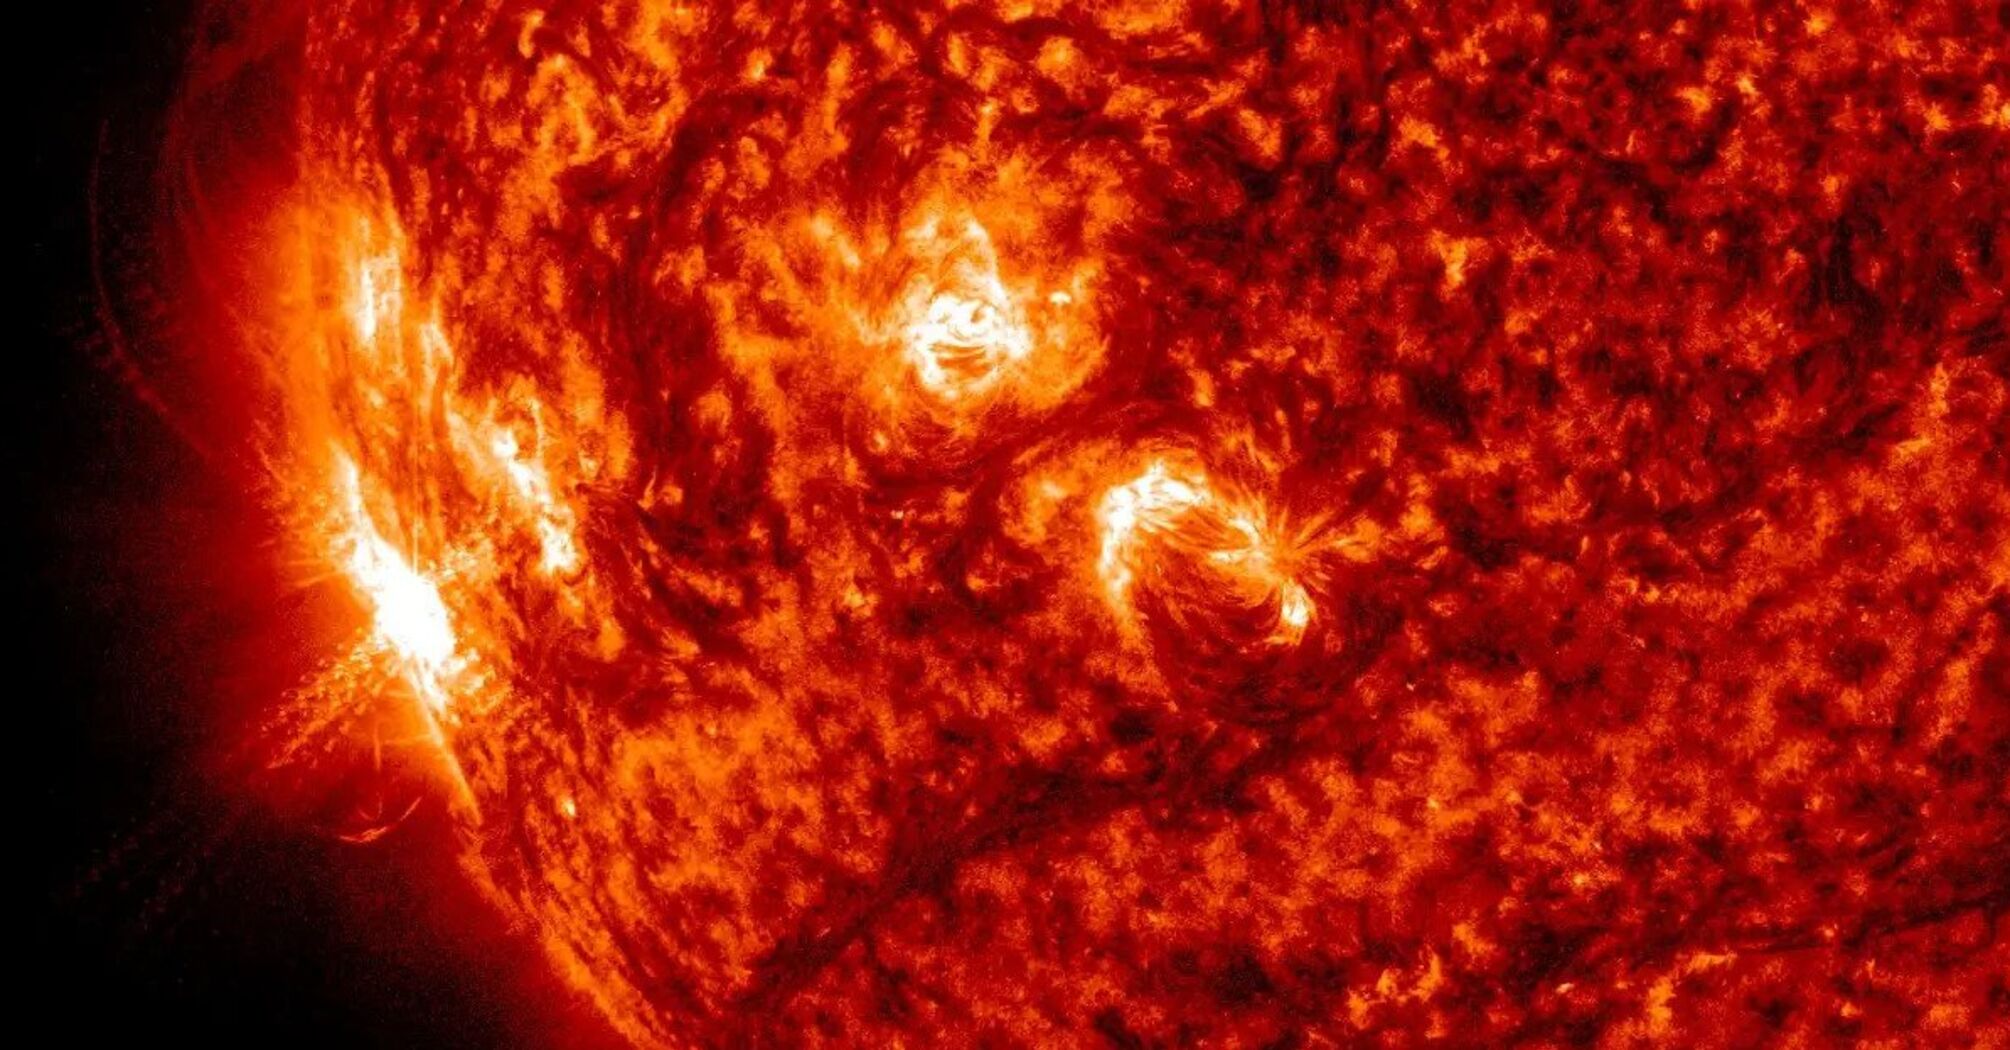 Old sunspot region 3664 returns with an M9.3 solar flare!